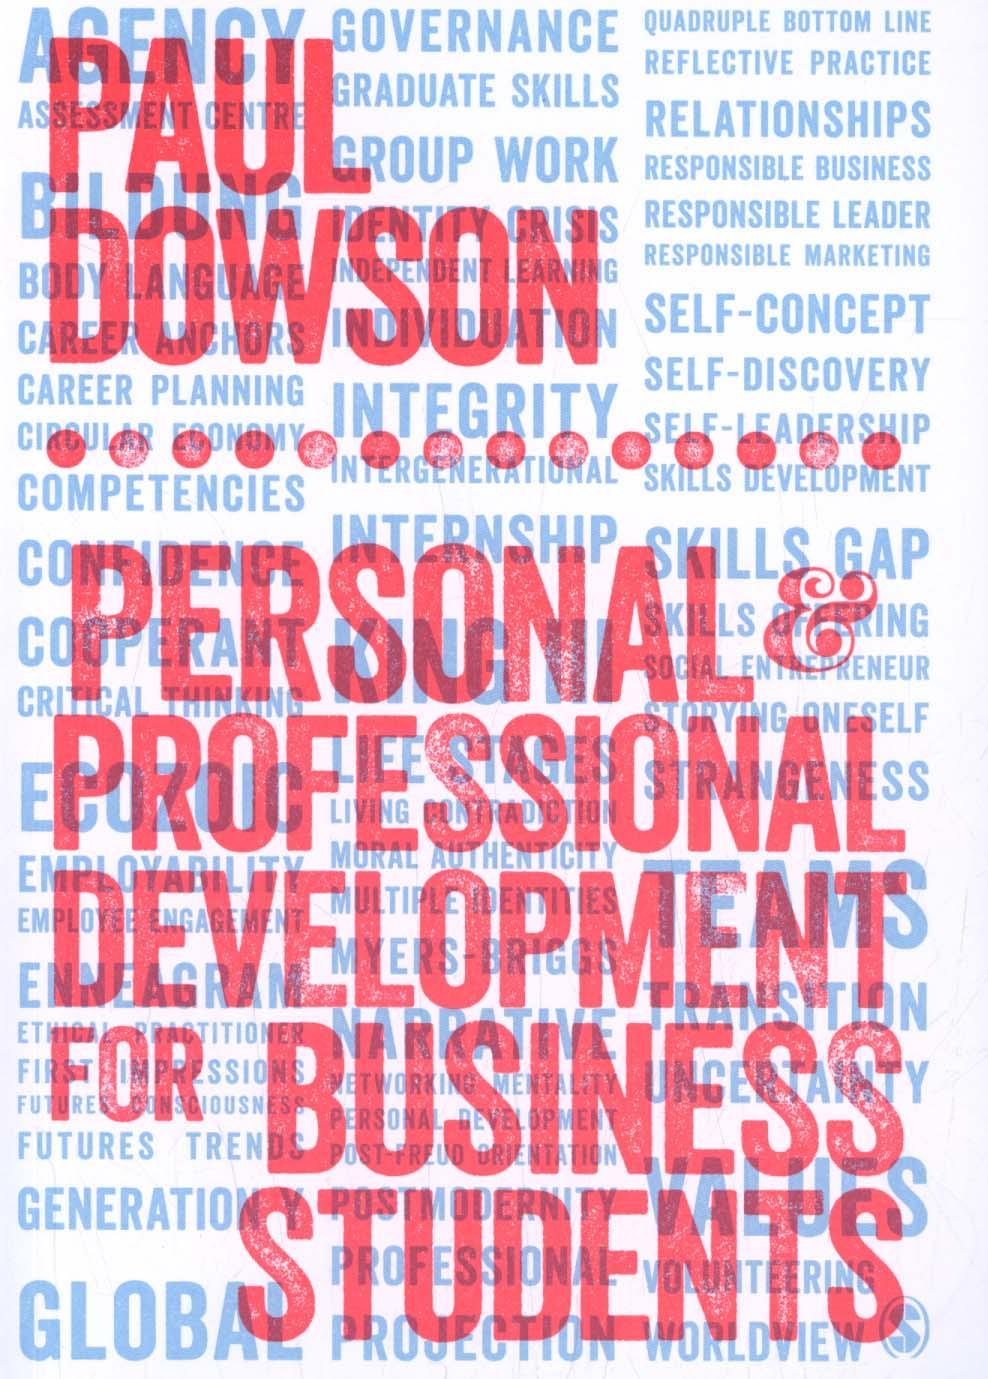 Personal and Professional Development for Business Students